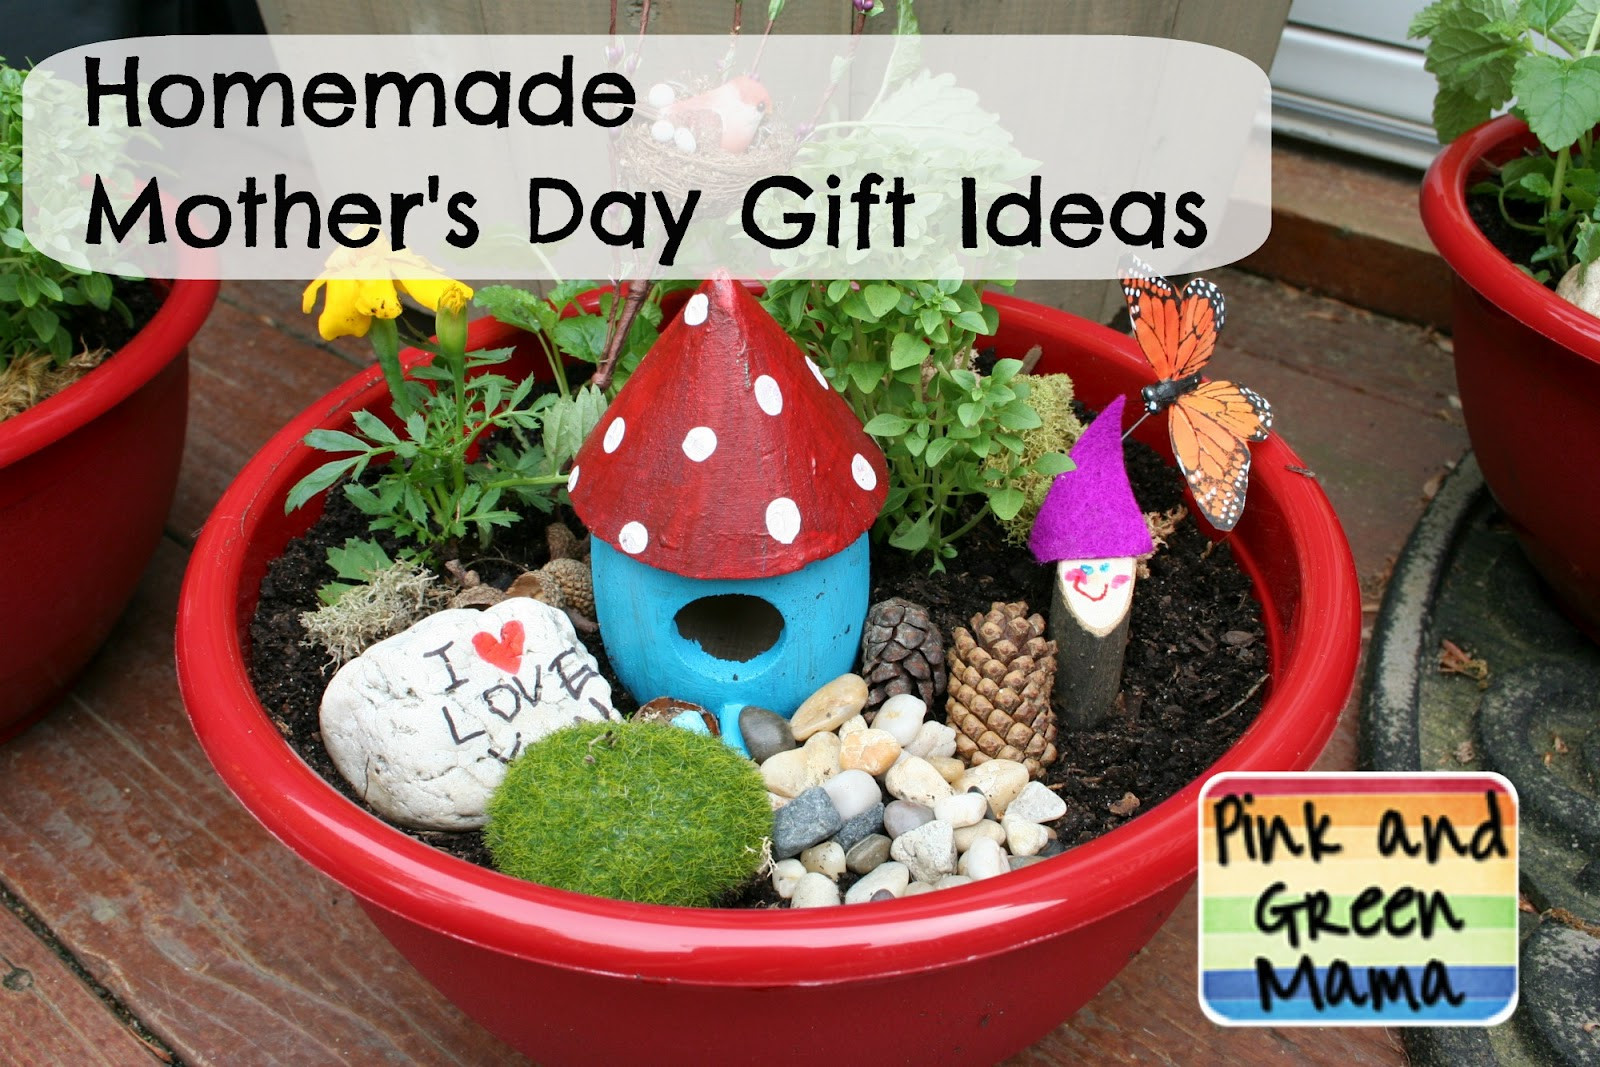 Homemade Mothers Day Gifts For Grandma
 mothers day ts for grandma mothers day ts homemade